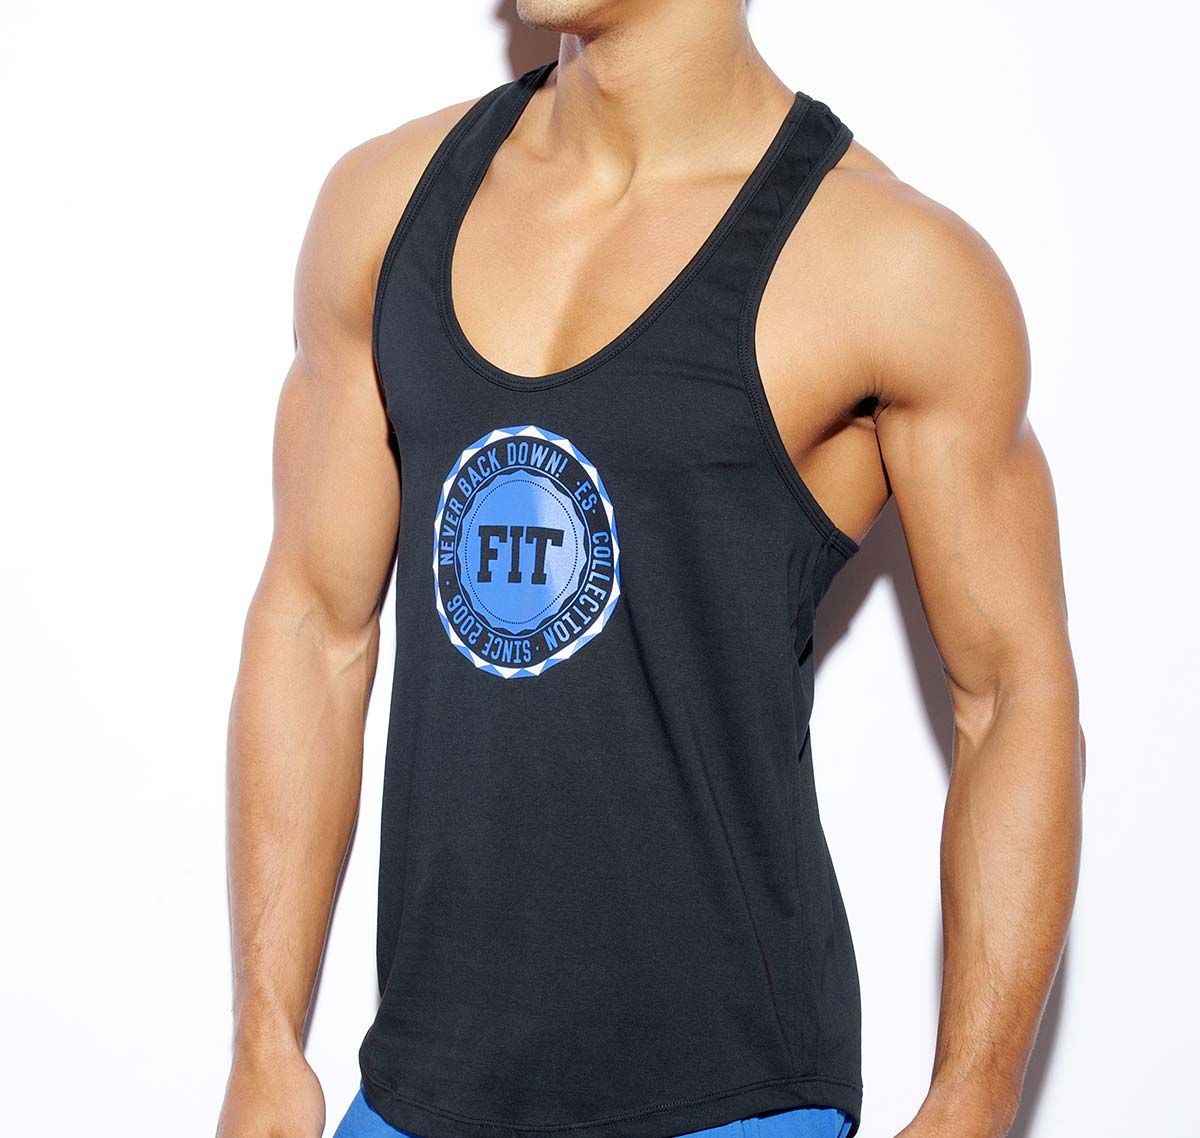 ES Collection NEVER BACK DOWN BADGE TANK TOP TS170, schwarz